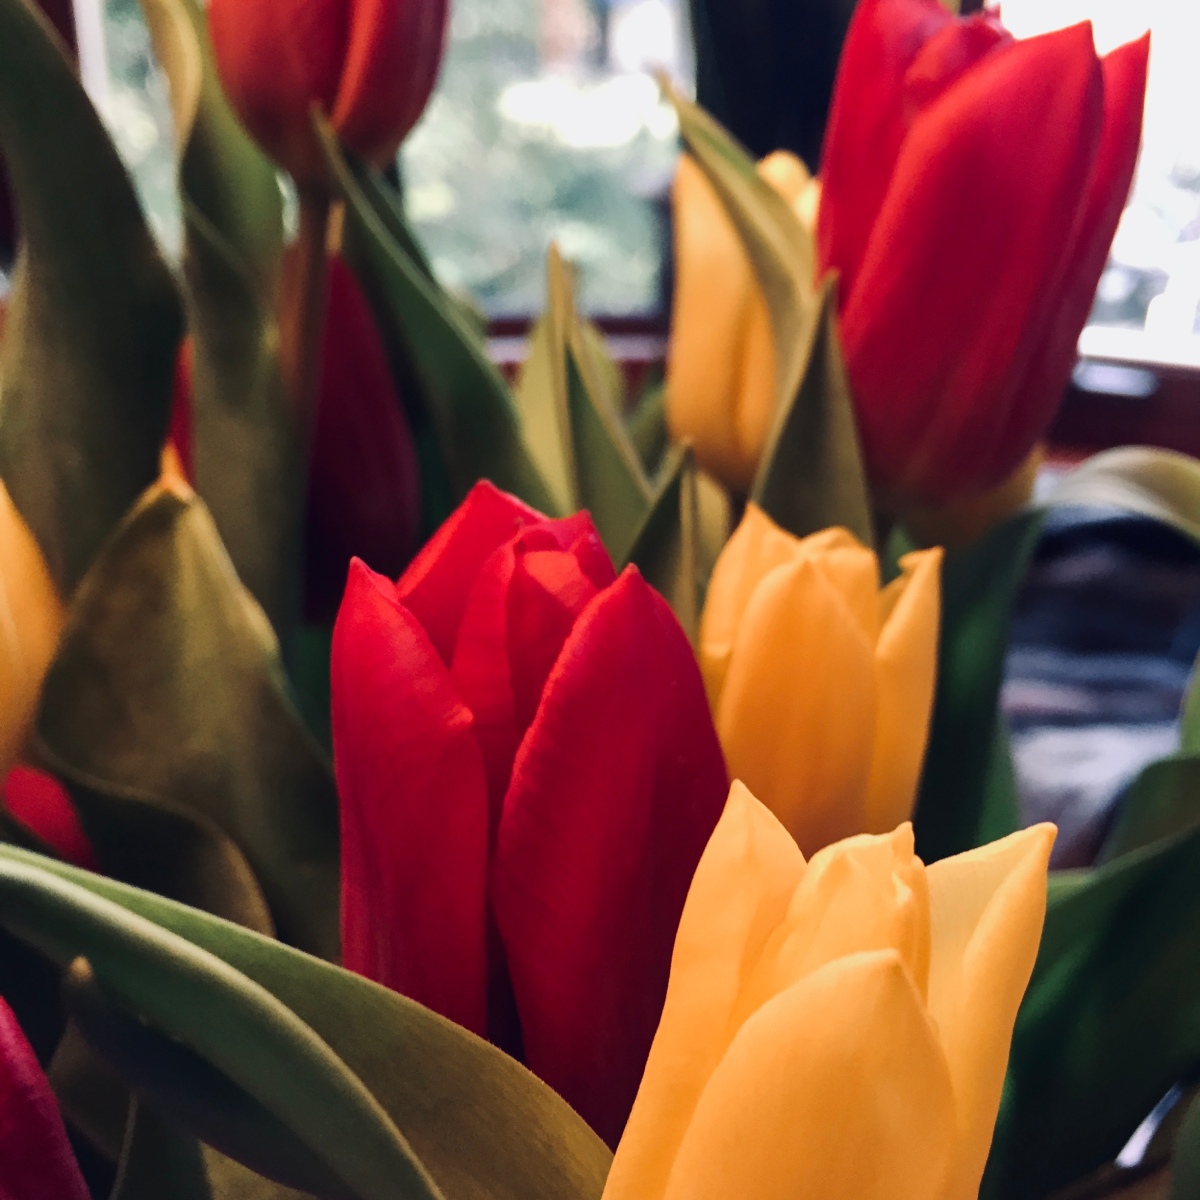 Photo of red and yellow tulips close up